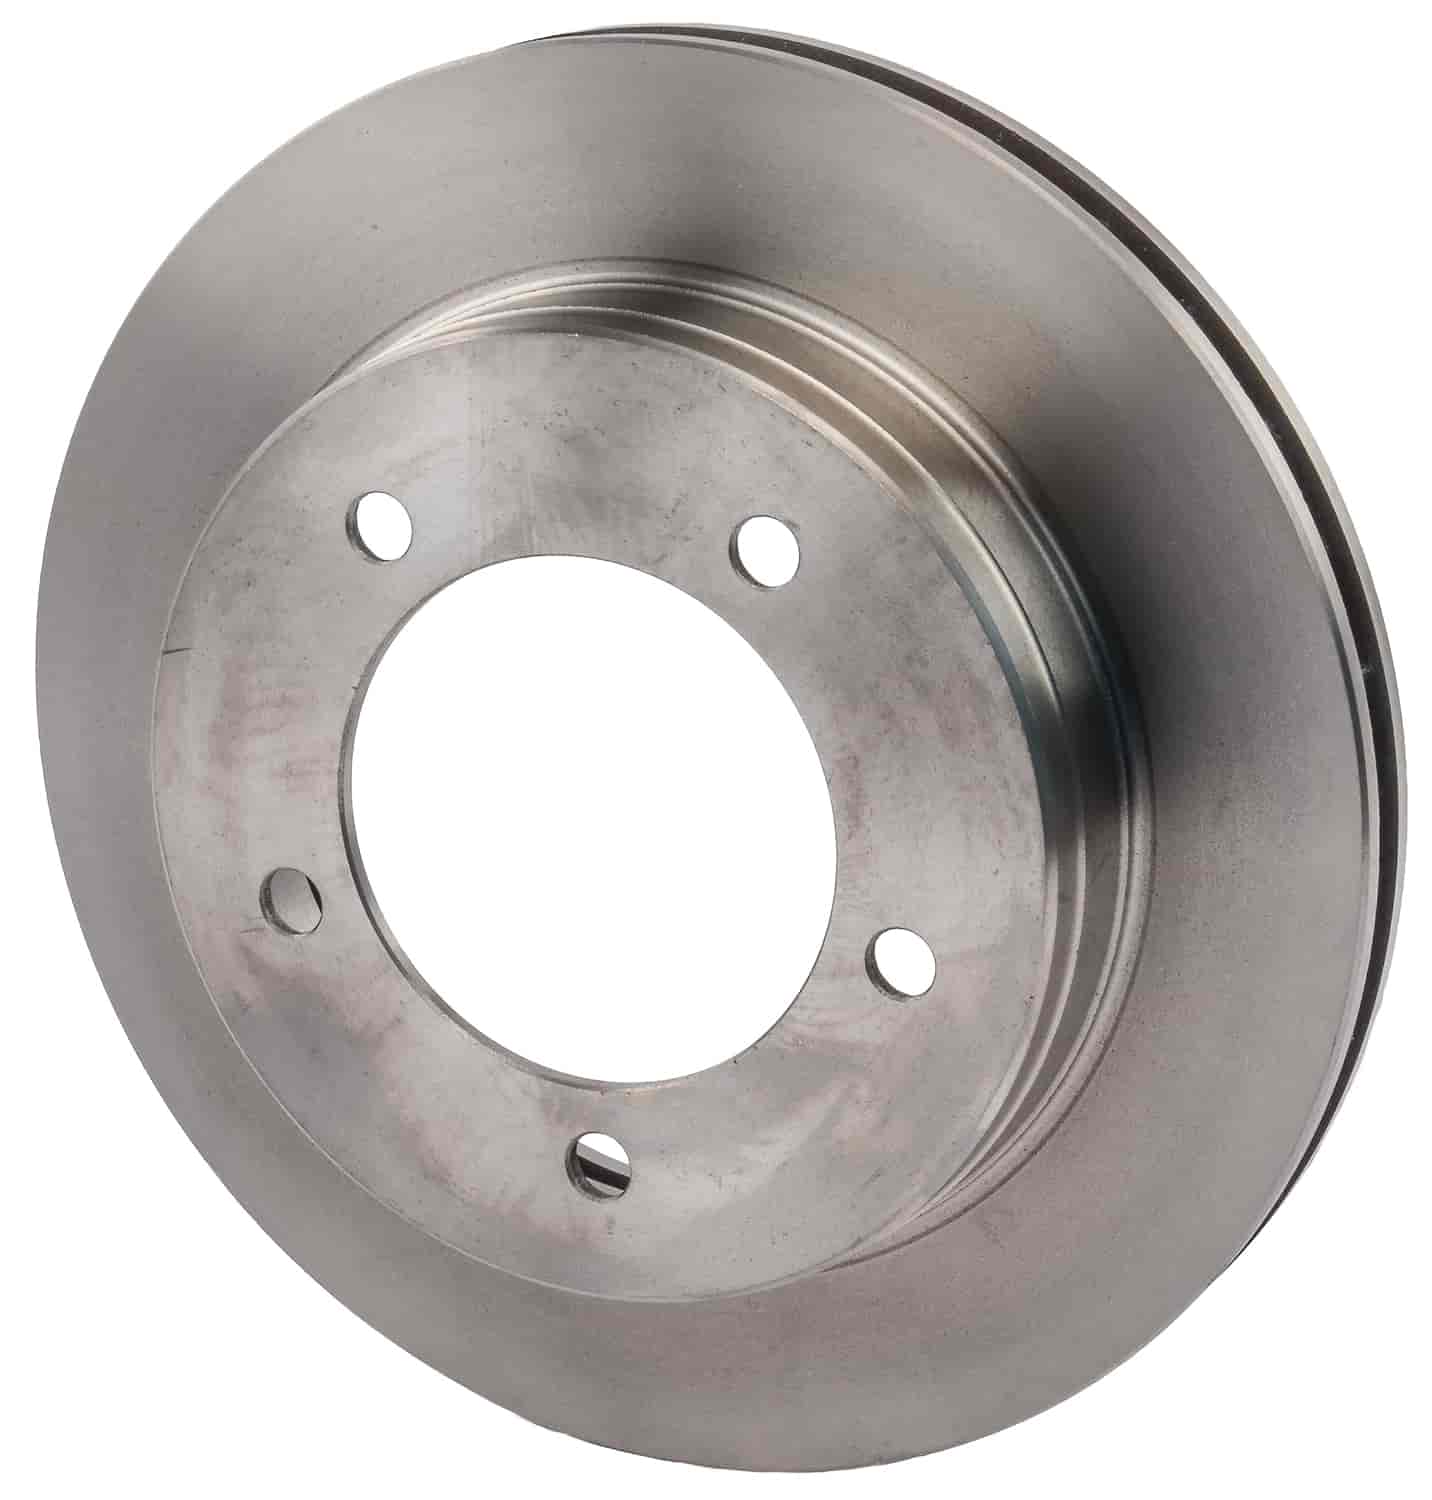 Replacement Brake Rotor for 9 in. Ford Rear Disc Conversion Kit 555-630604 and 555-630616